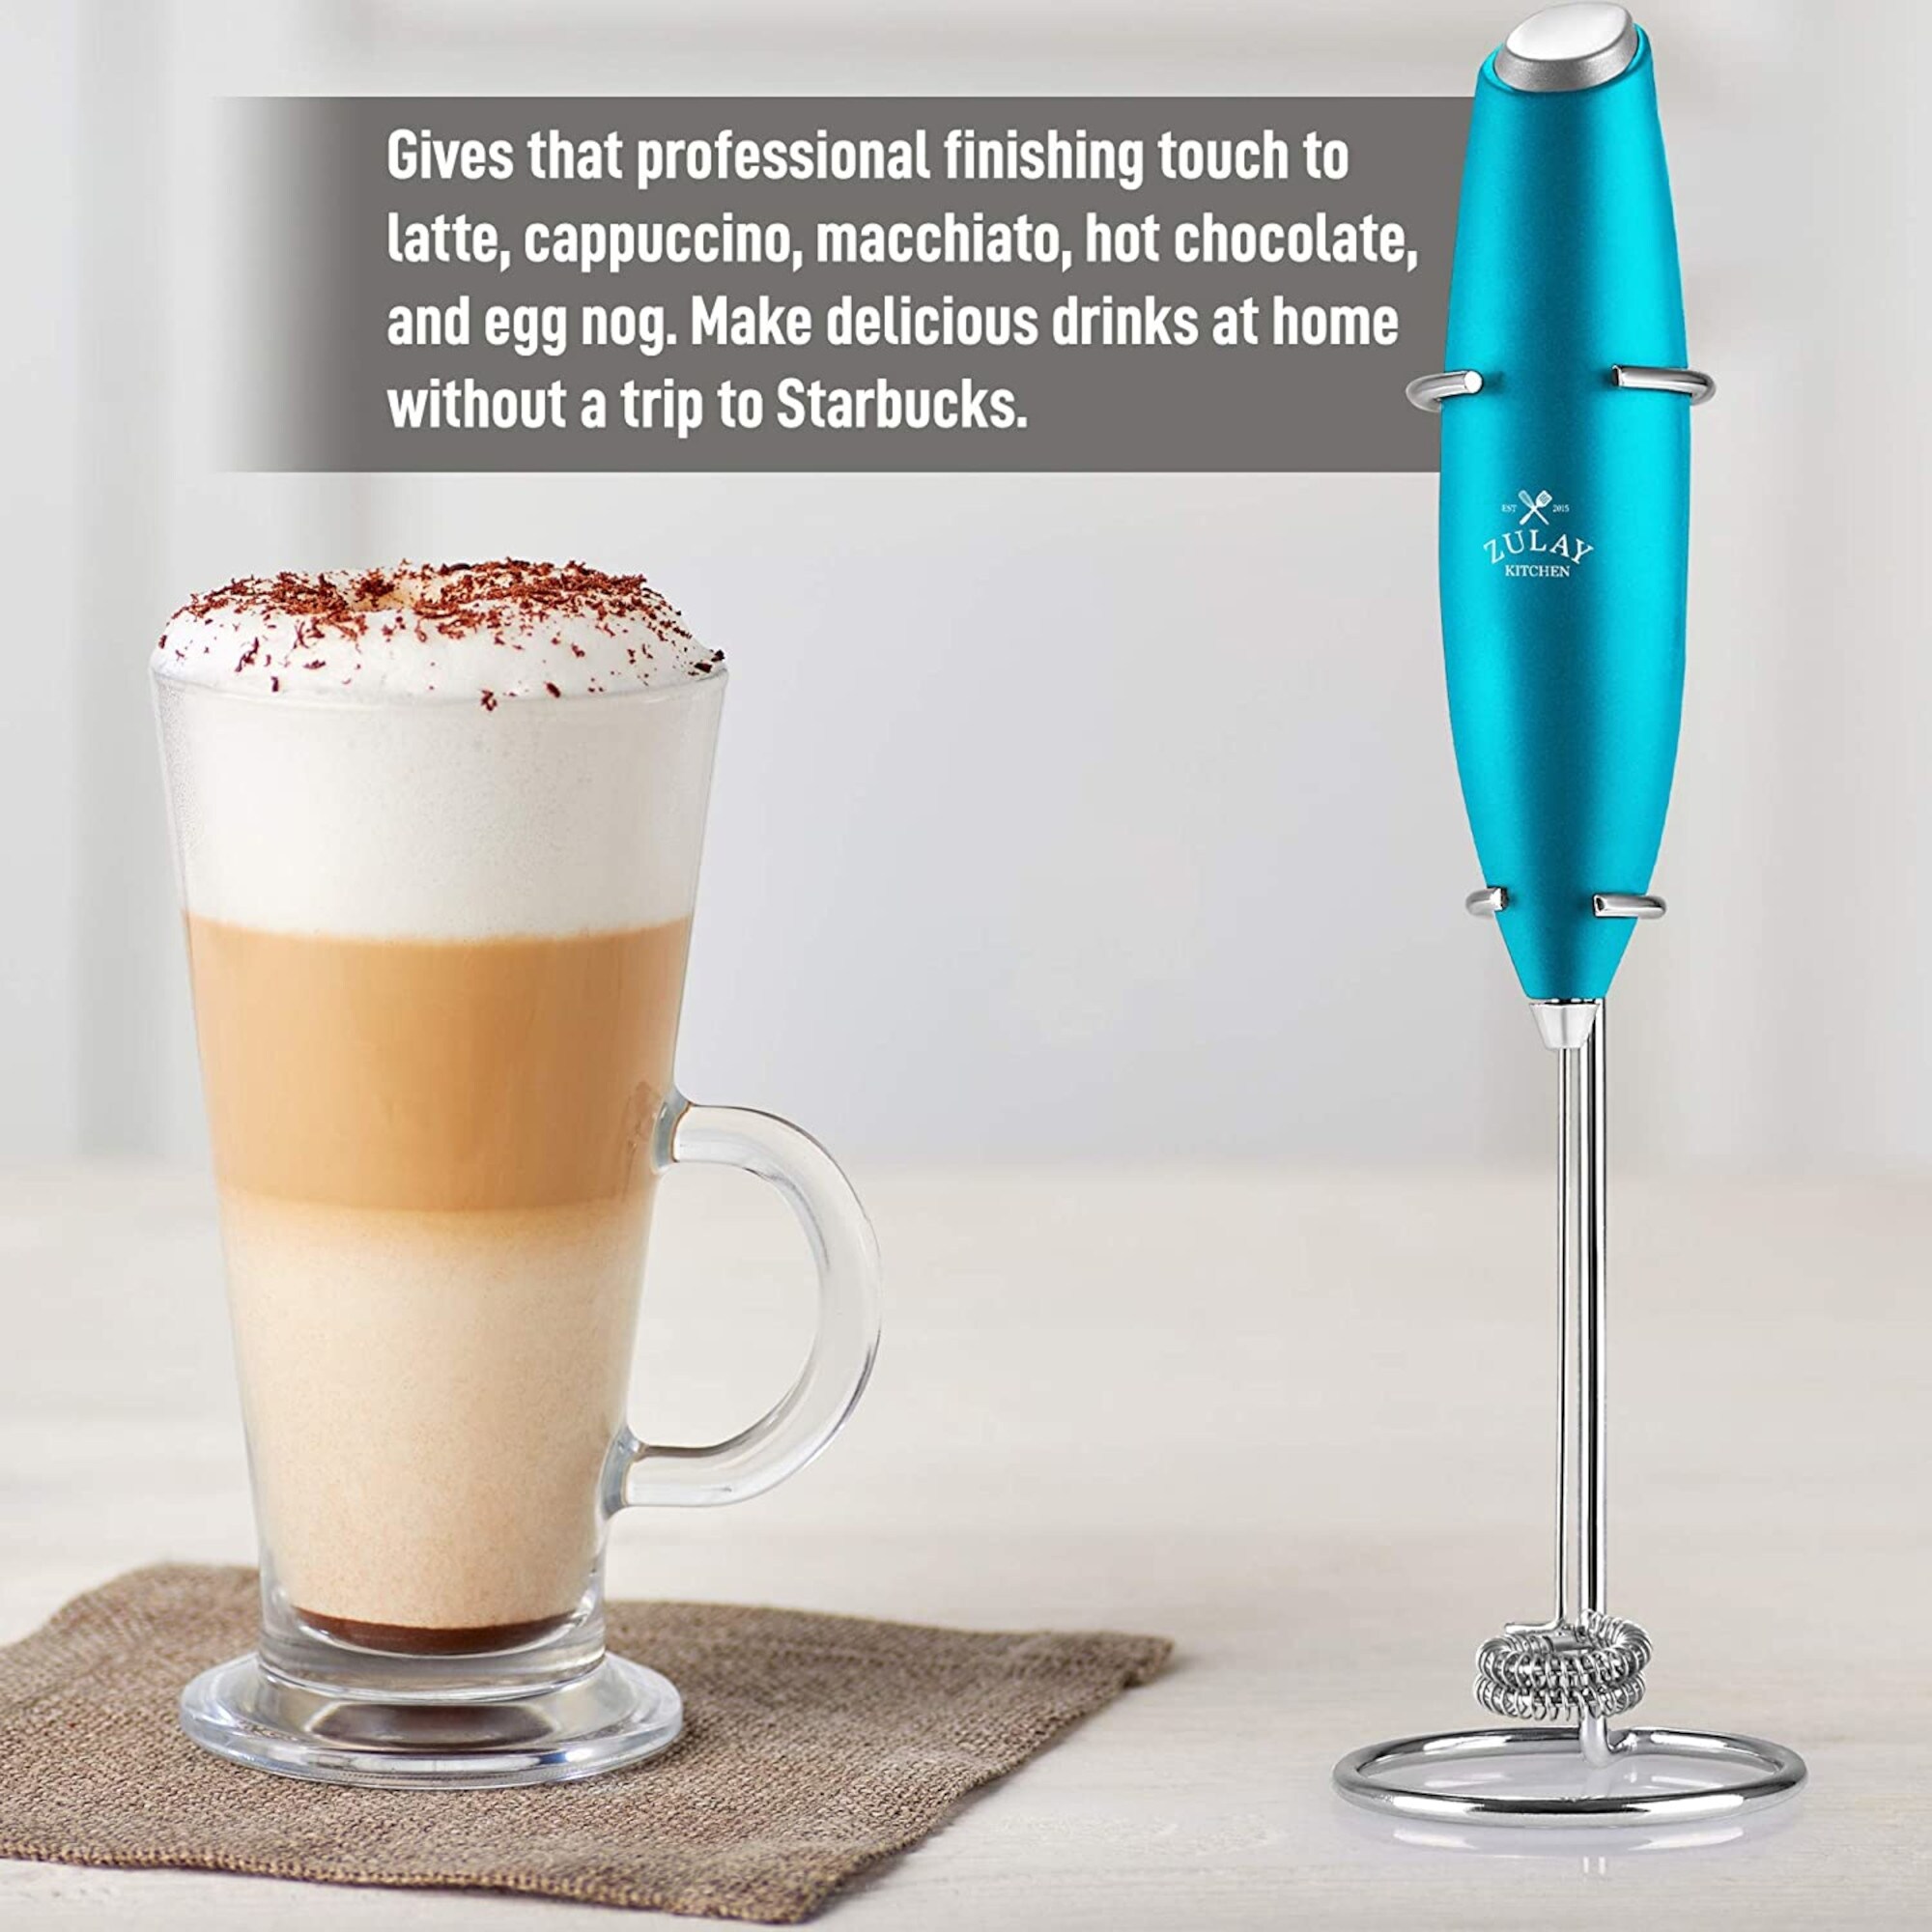 https://ak1.ostkcdn.com/images/products/is/images/direct/7ff4590b3315aaaa29f38b2cb8582045450f3303/Zulay-Double-Whisk-Milk-Frother-Handheld-Mixer---Teal.jpg